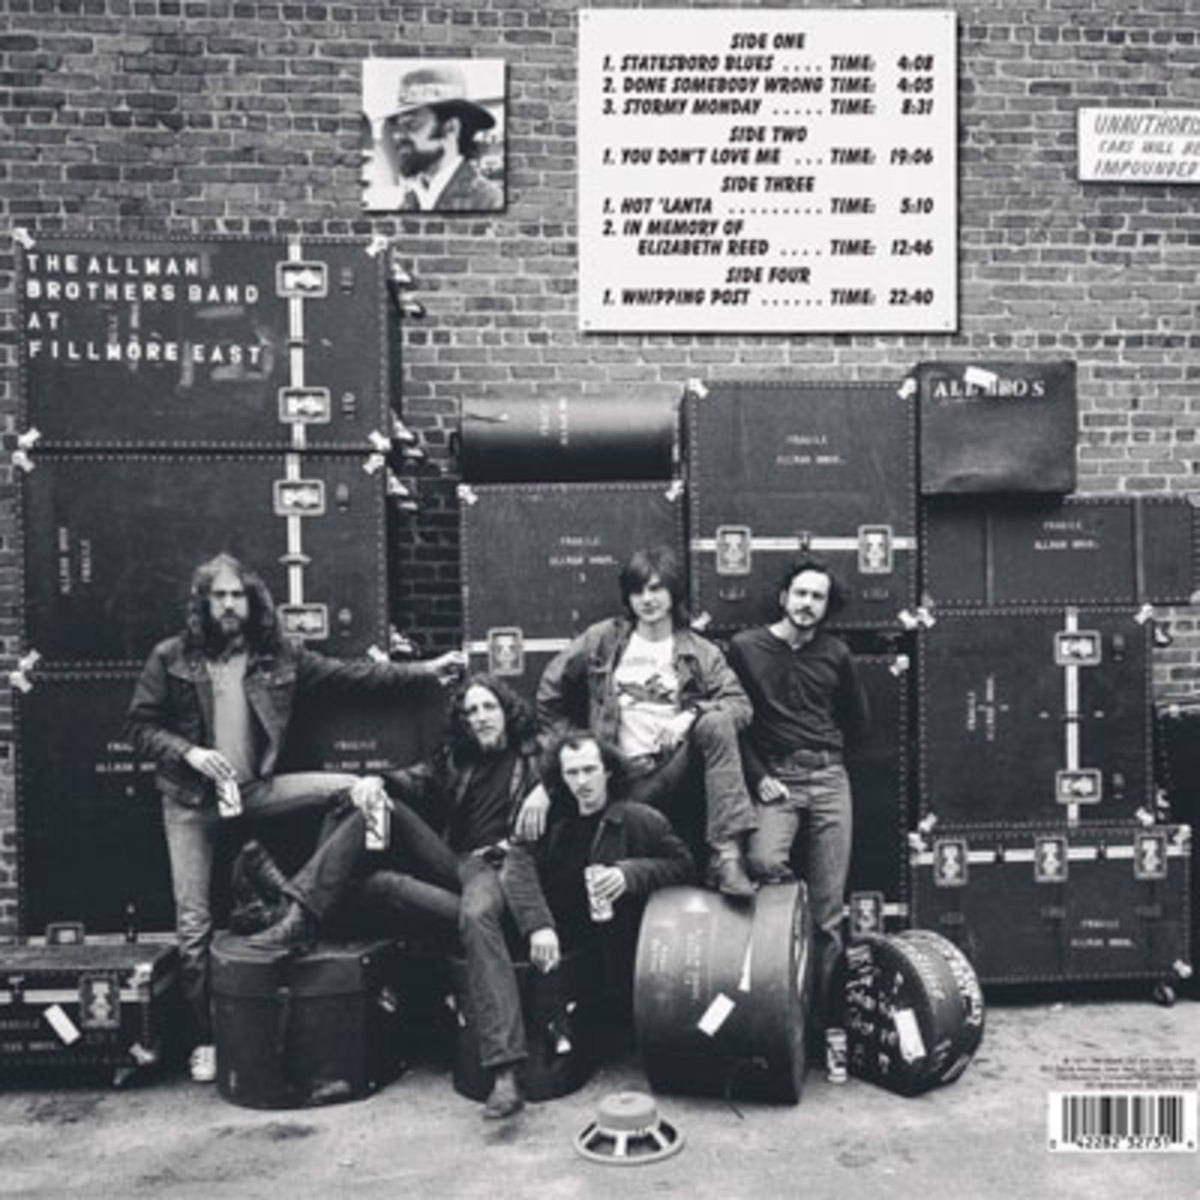 the-allman-brothers-band-the-allman-brothers-band-at-fillmore-east-back